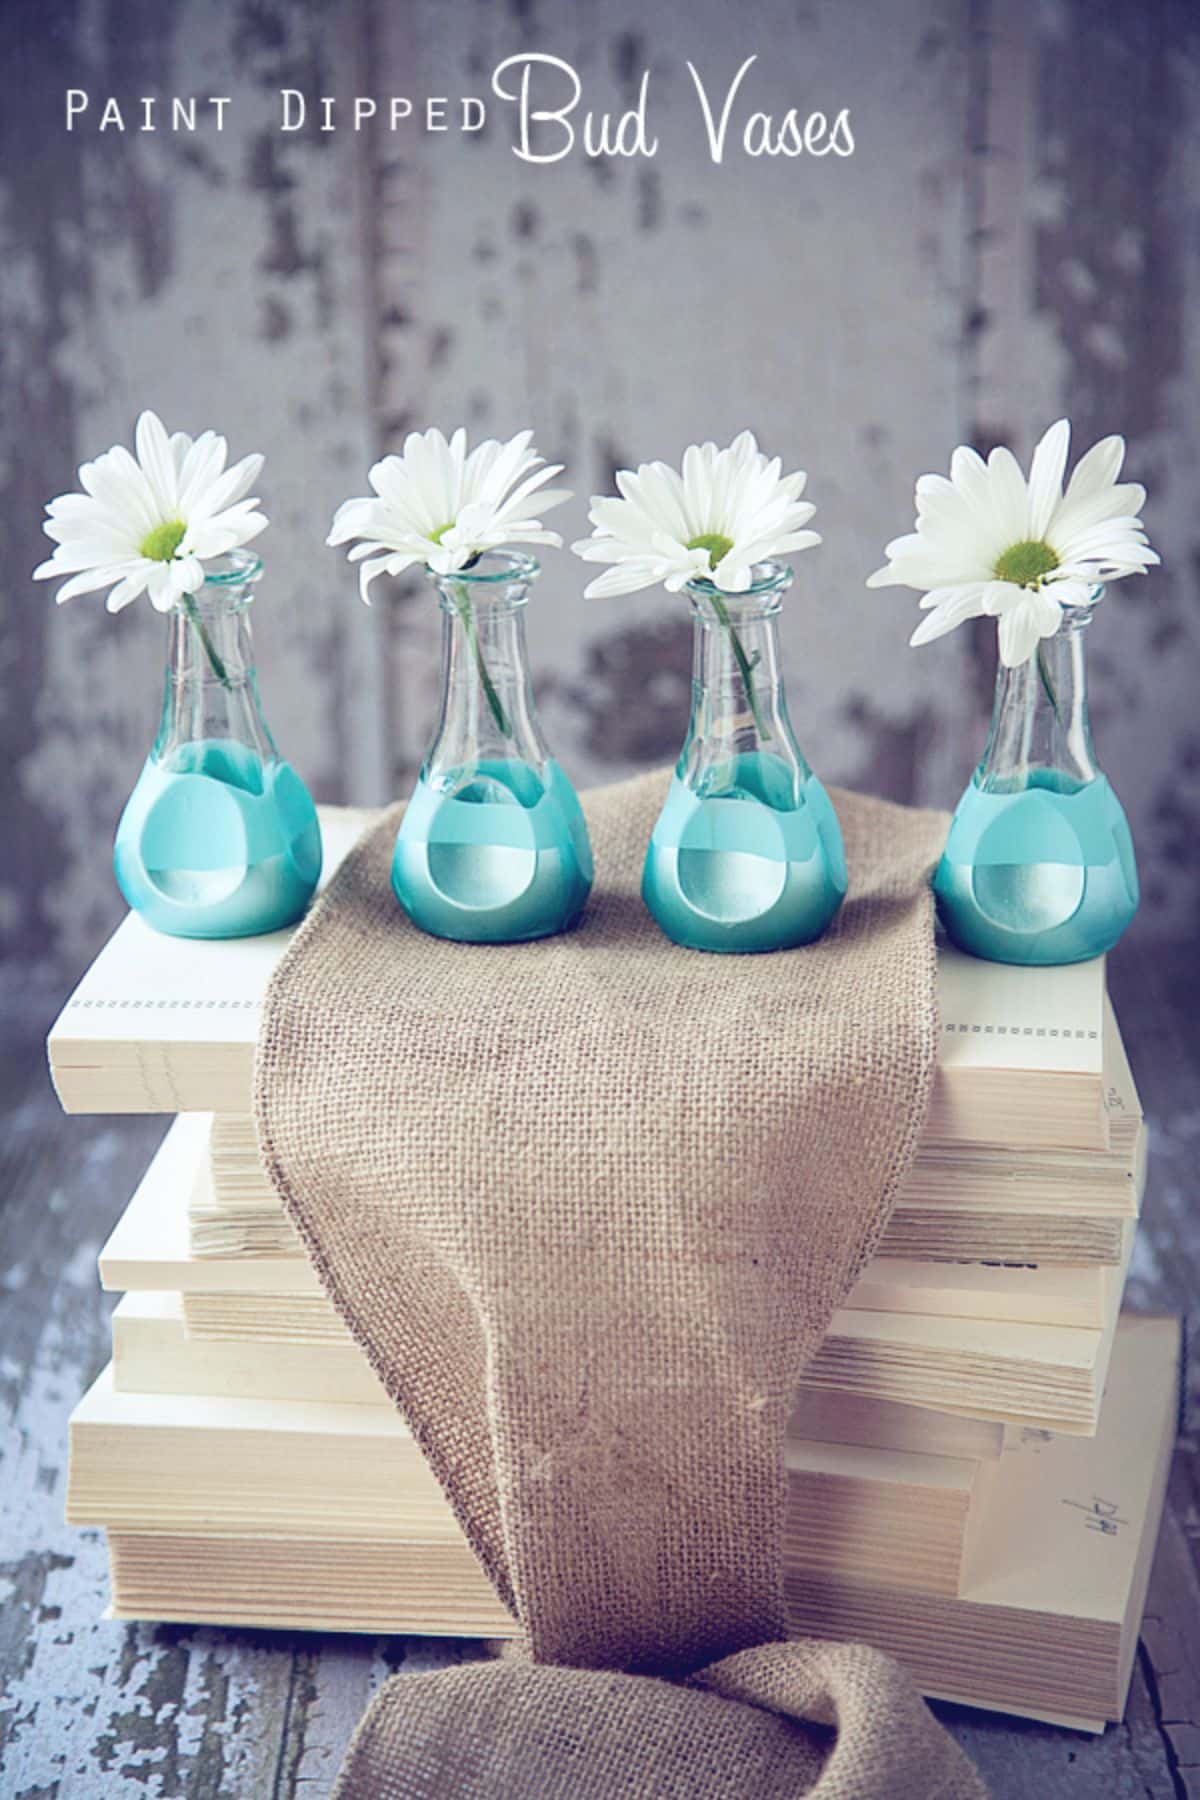 Paint-Dipped Bud Vases